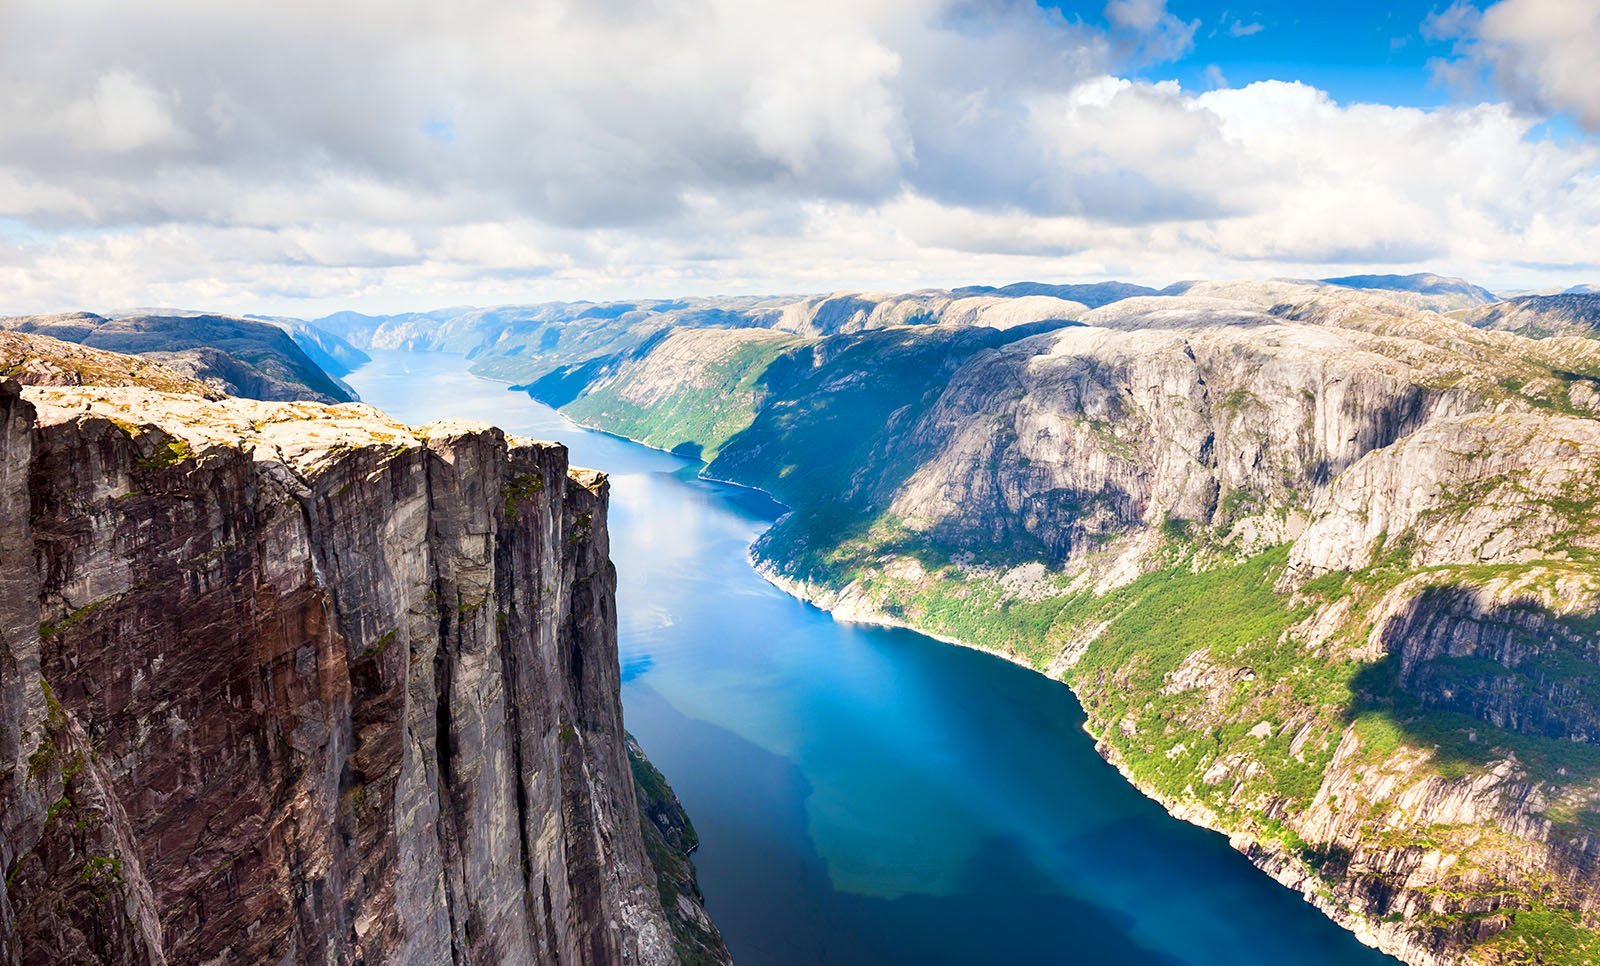 A view of the Lysefjord in Norway